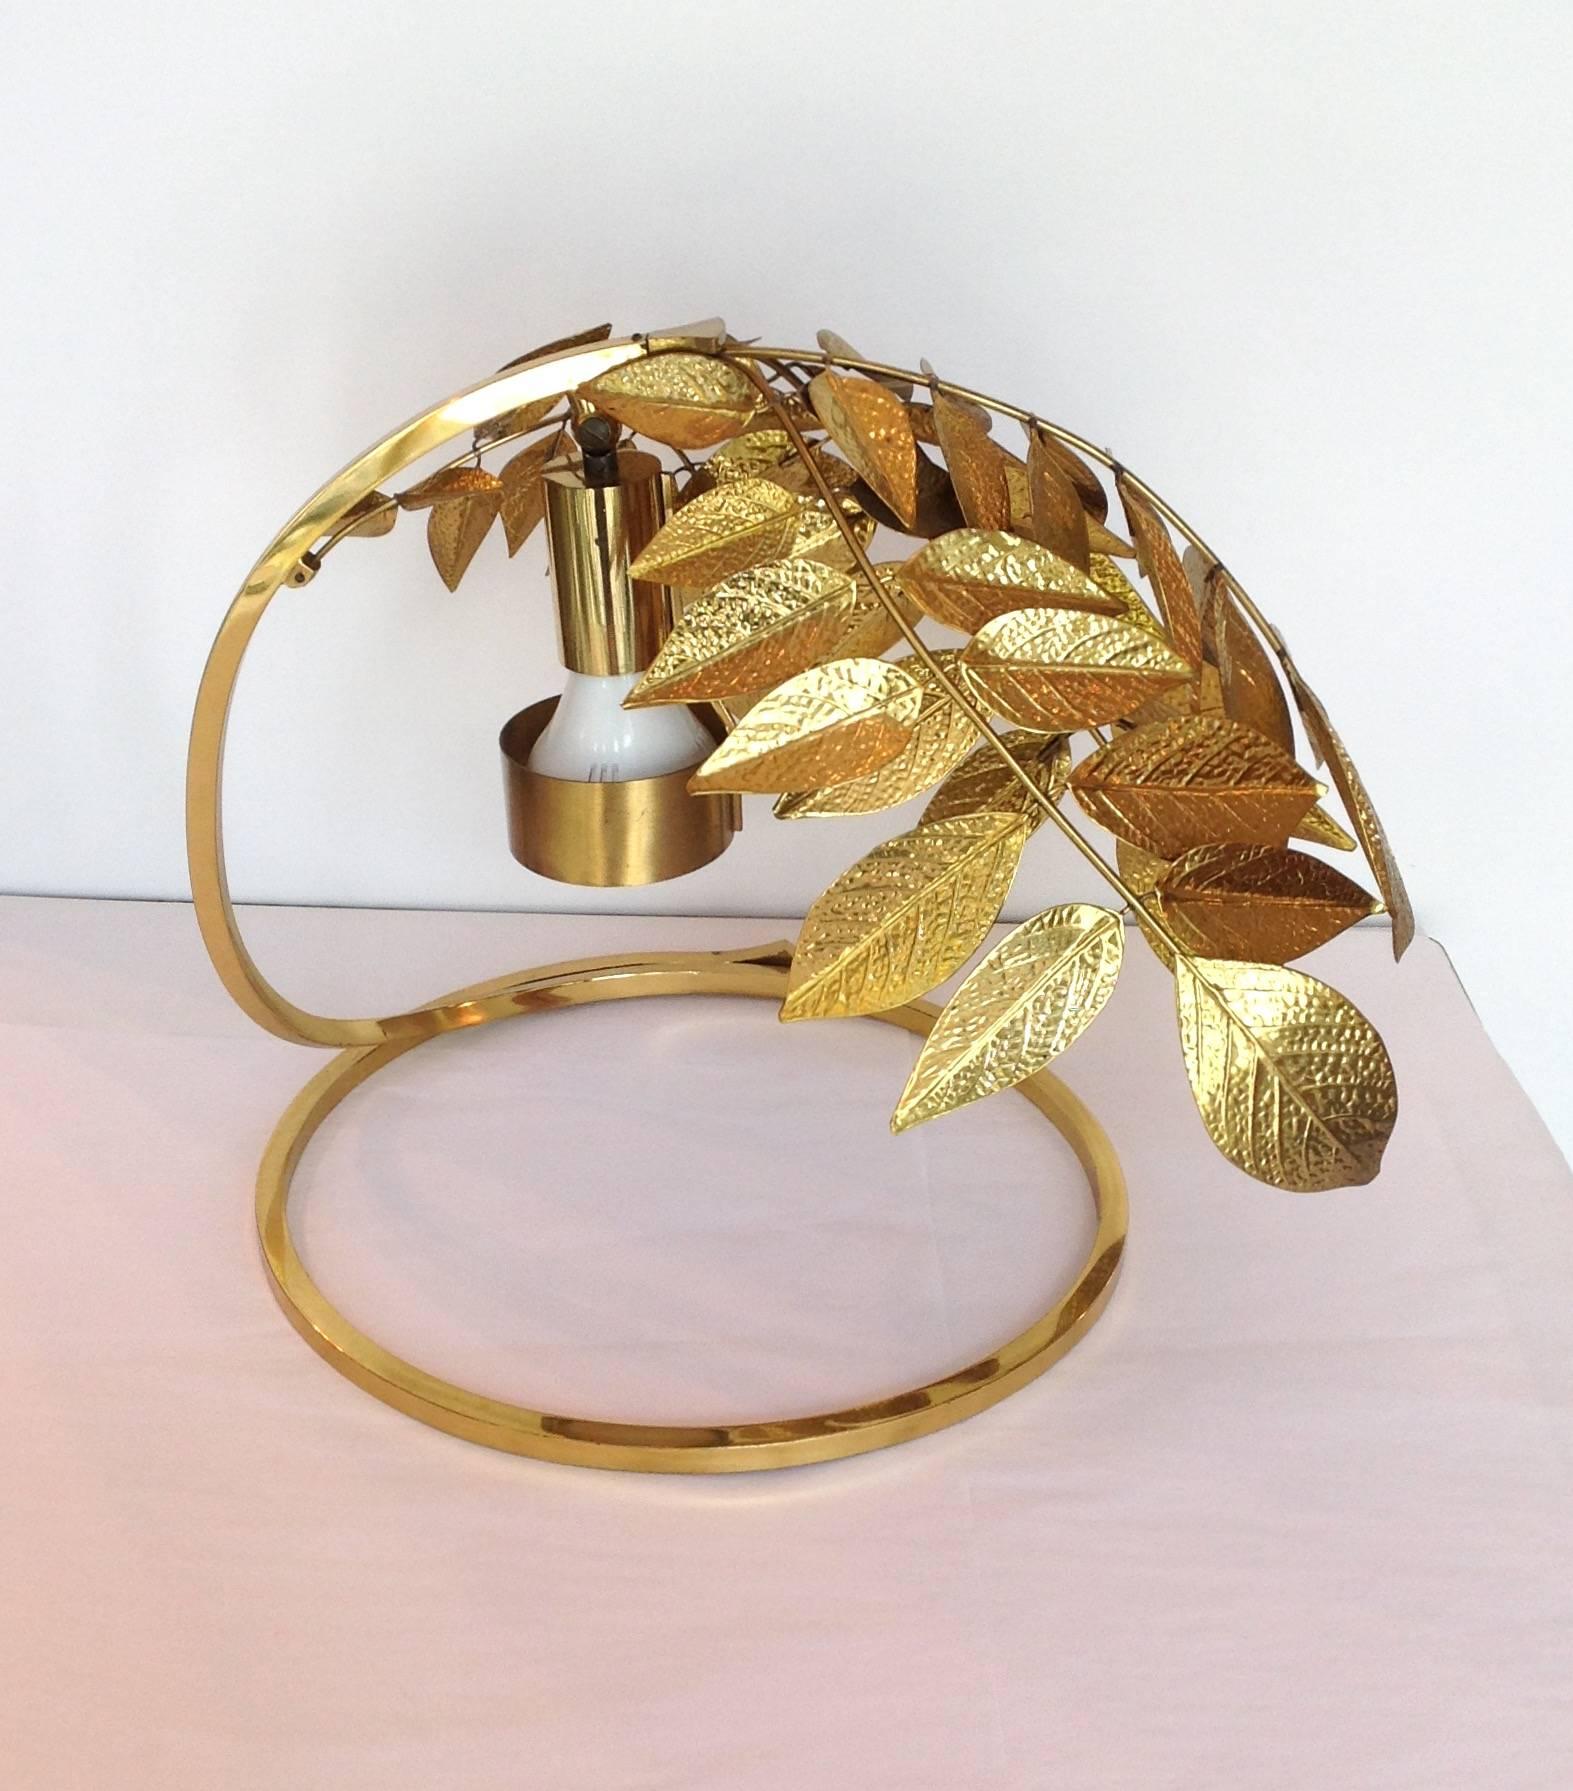 Vintage hammered brass leaves table lamp by Italian designer Tomasso Barbi. The leaves overhang the circular base, circa 1970s.